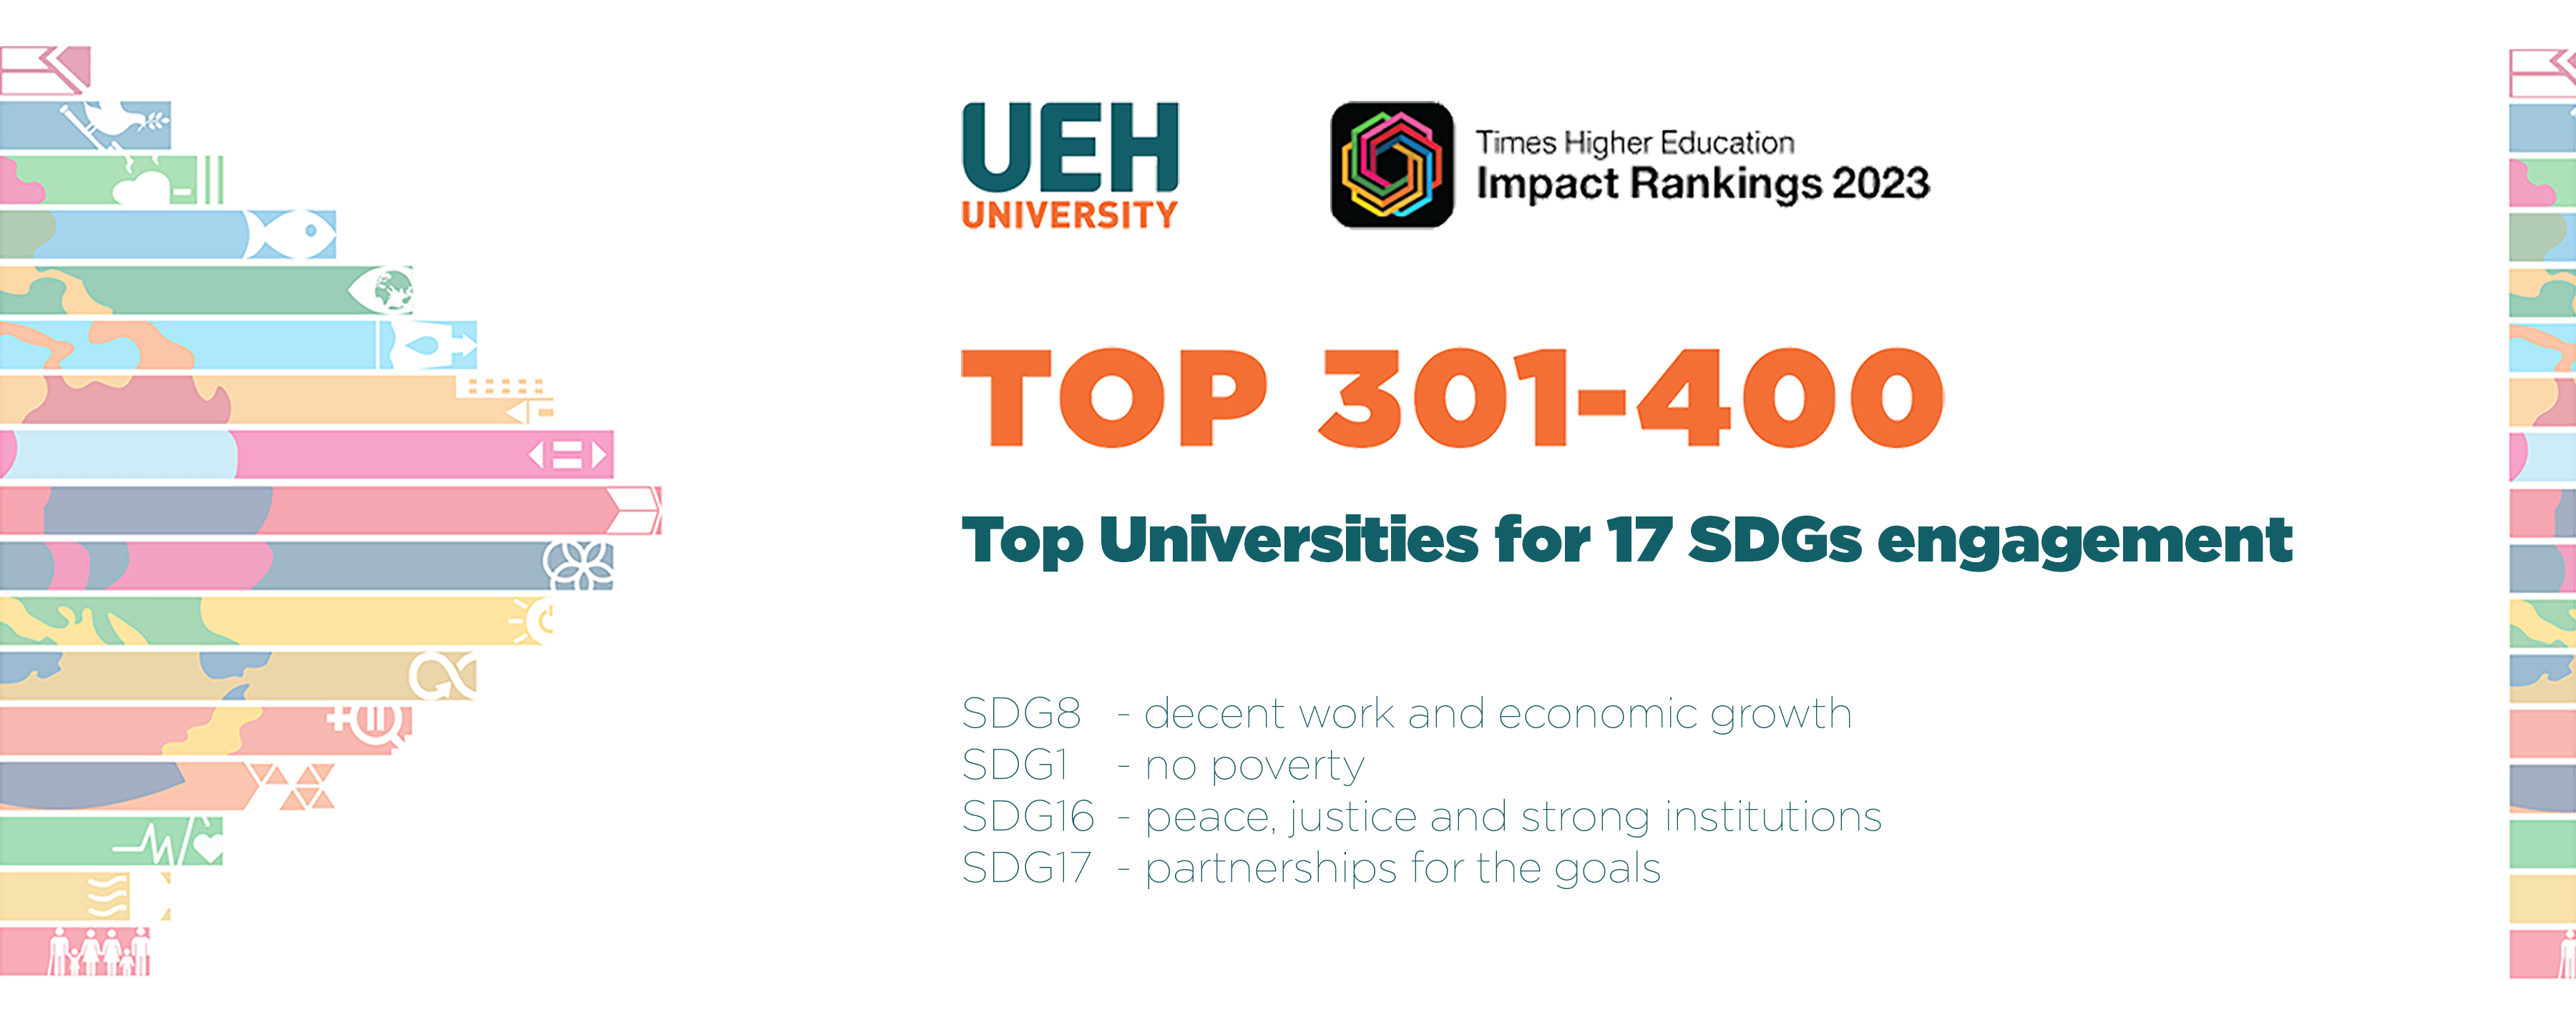 UEH Makes Historic Debut as Vietnam's Highest-Ranked University, Securing Top 301-400 Spot in THE Impact Rankings 2023